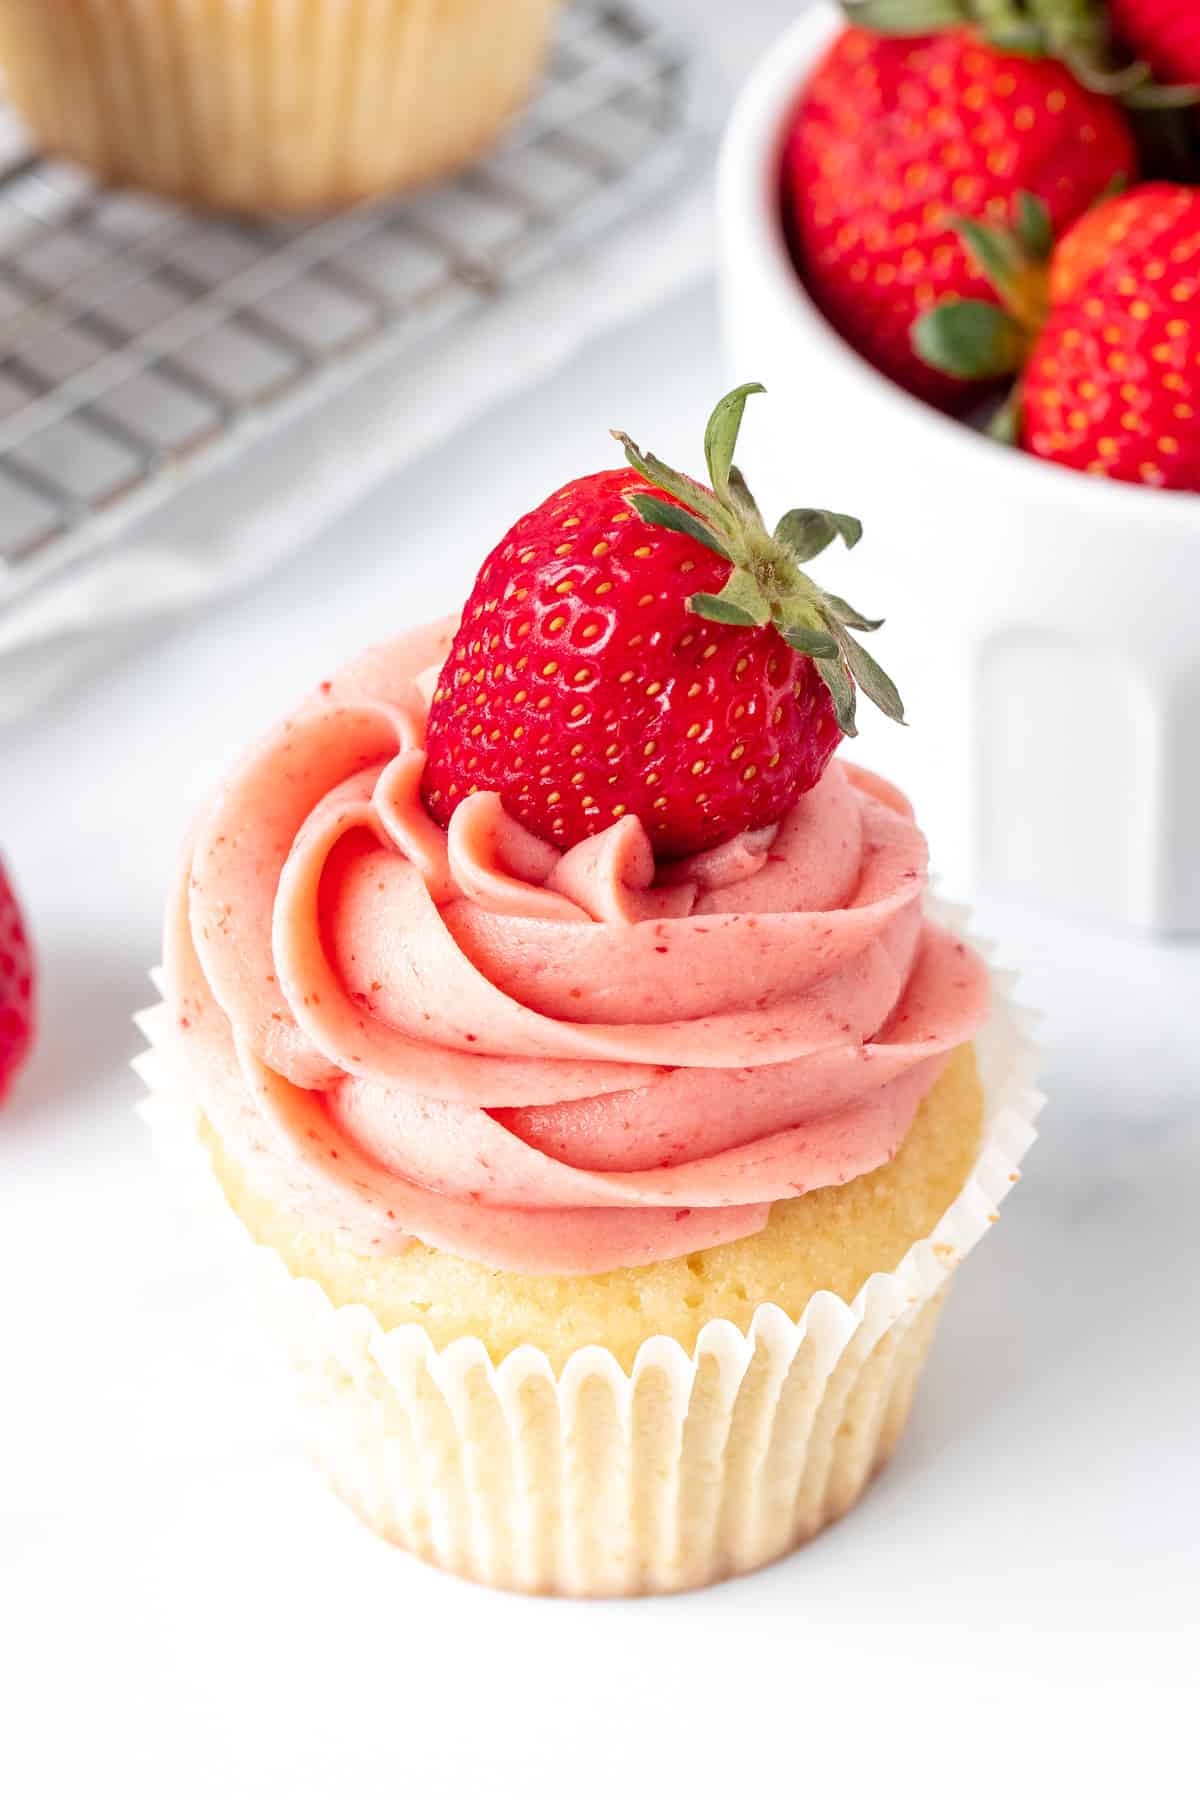 Vanilla cupcake with strawberry buttercream frosting